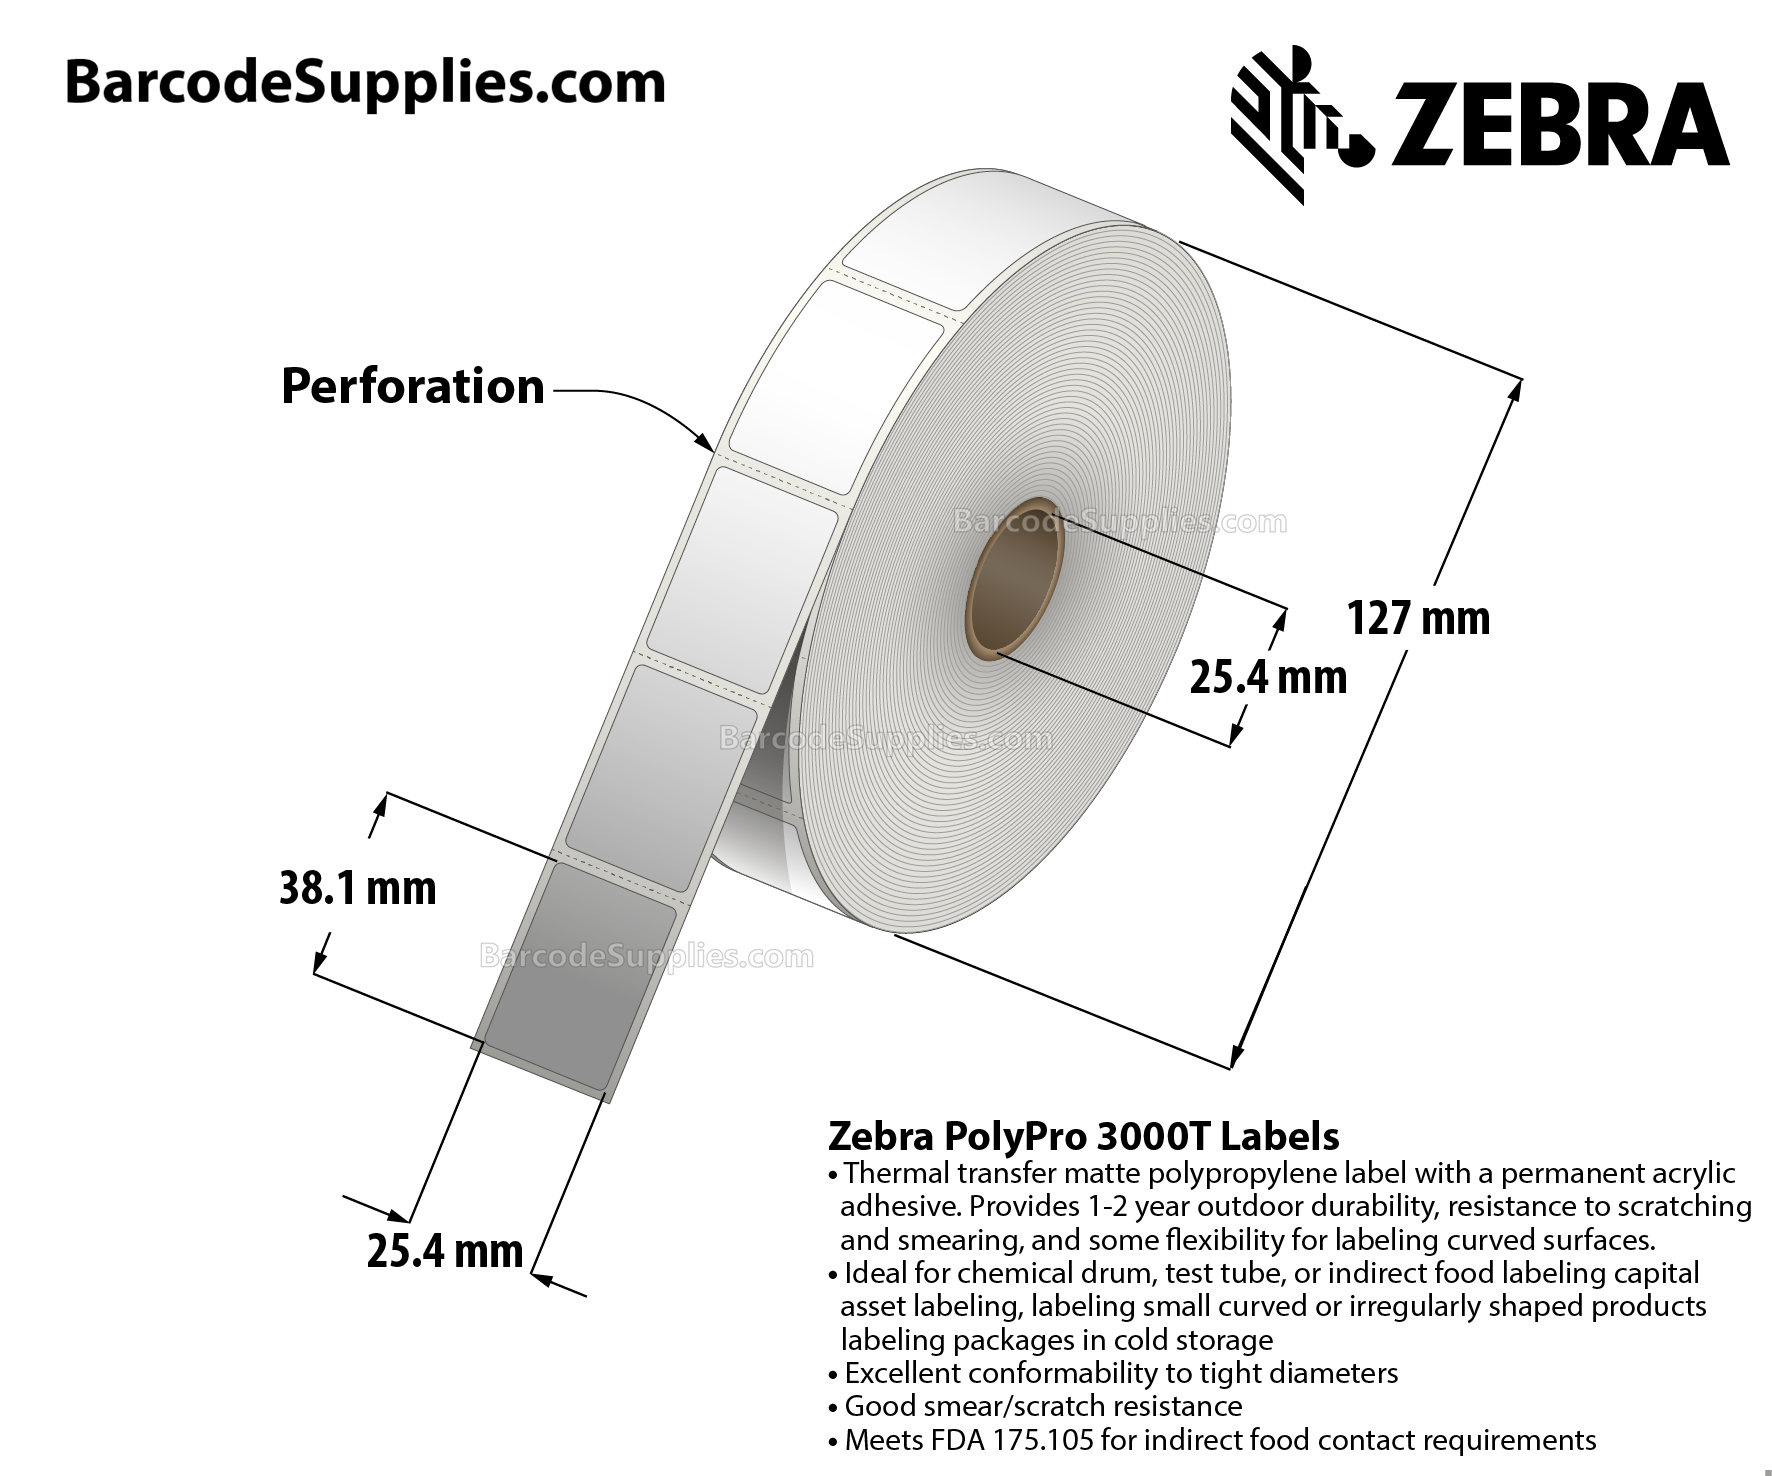 1 x 1.5 Thermal Transfer White PolyPro 3000T Labels With Permanent Adhesive - Perforated - 1450 Labels Per Roll - Carton Of 1 Rolls - 1450 Labels Total - MPN: 10023329